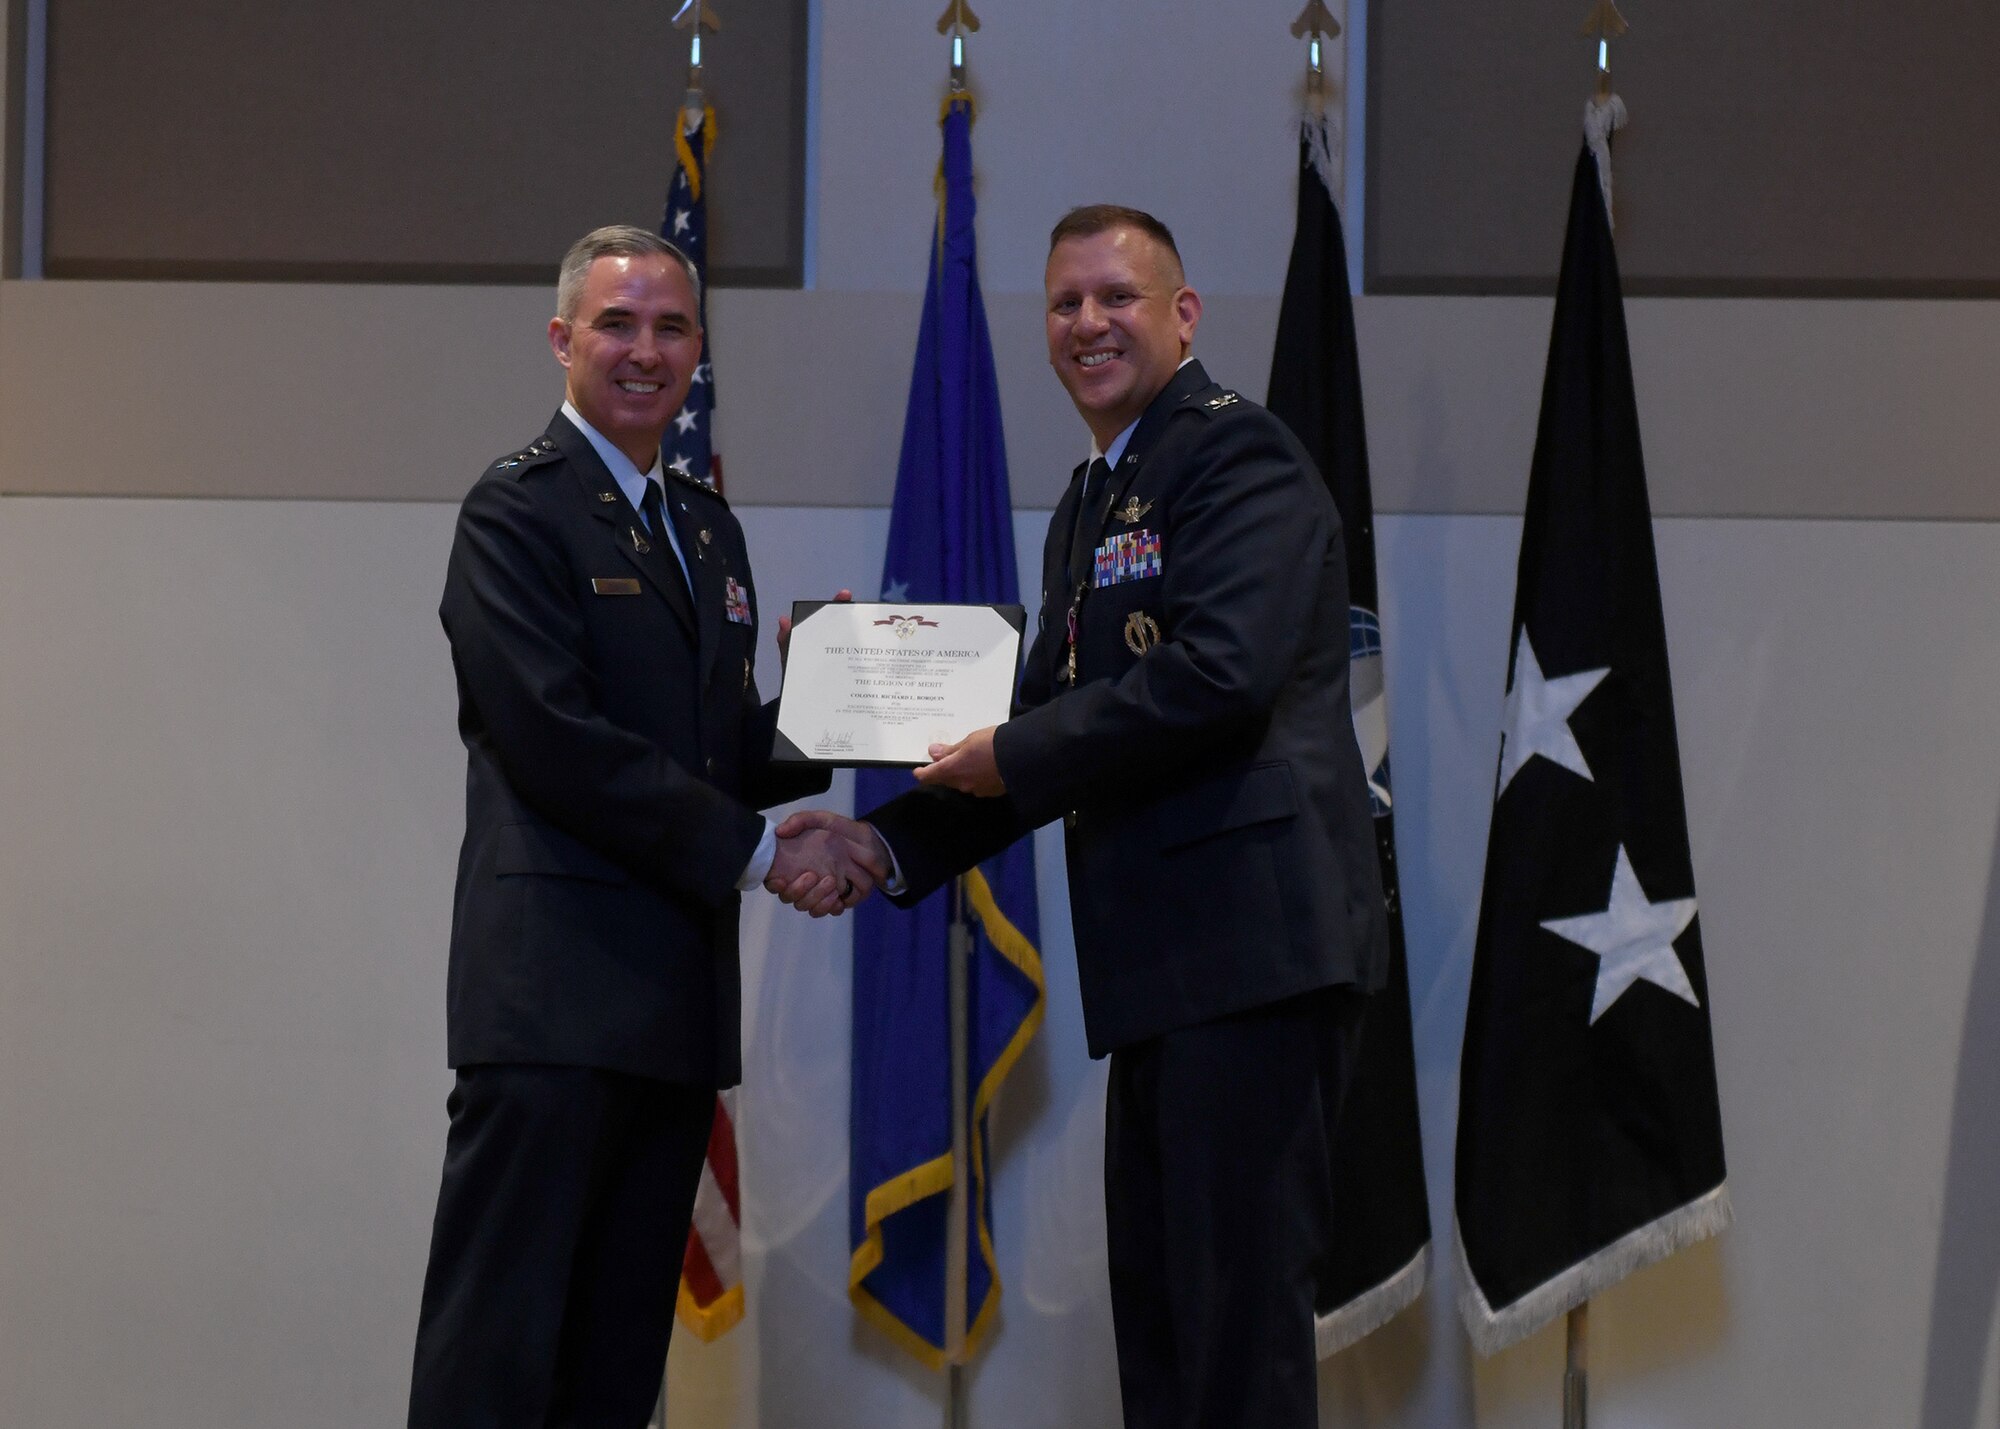 Col. Richard Bourquin, outgoing Space Delta 4 commander, poses with Lt. Gen. Stephen Whiting, Space Operations Command commander, after receiving the Legion of Merit medal during a change of command ceremony at Buckley Space Force Base, Colo., July 15, 2021. Prior to receiving the medal, Whiting reflected on Bourquin’s tenure as the first DEL 4 commander. (U.S. Space Force photo by Airman 1st Class Haley N. Blevins)